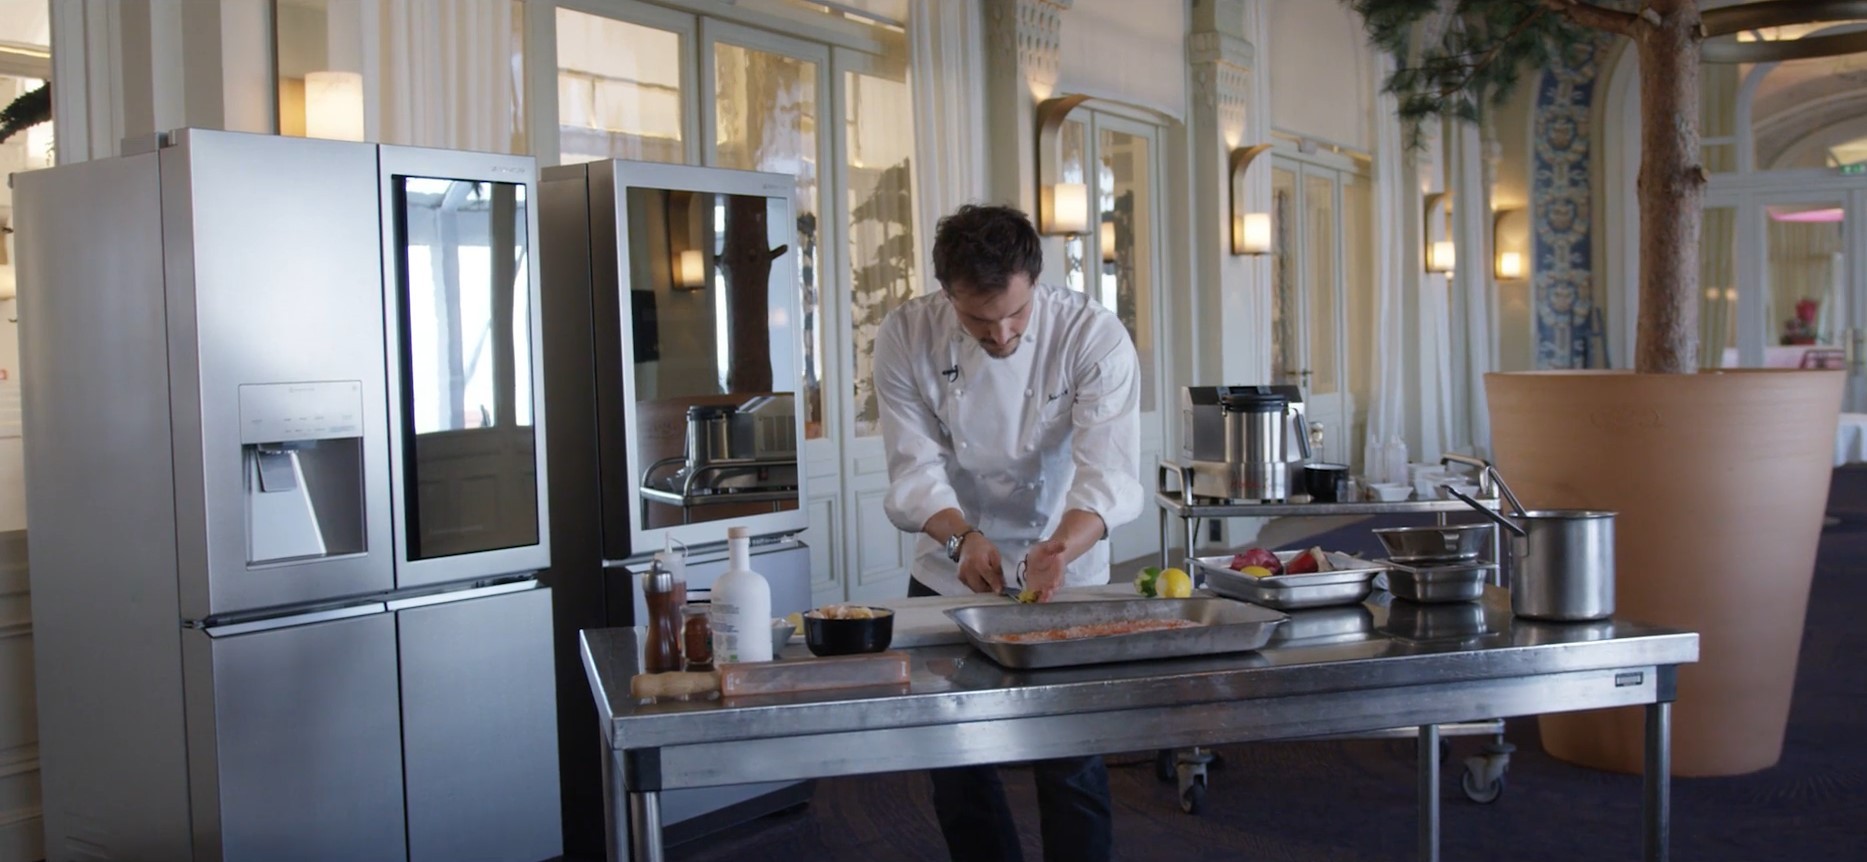 French star chef Juan Arbelaez focuses on cooking food using the high-end LG SIGNATURE home appliances.